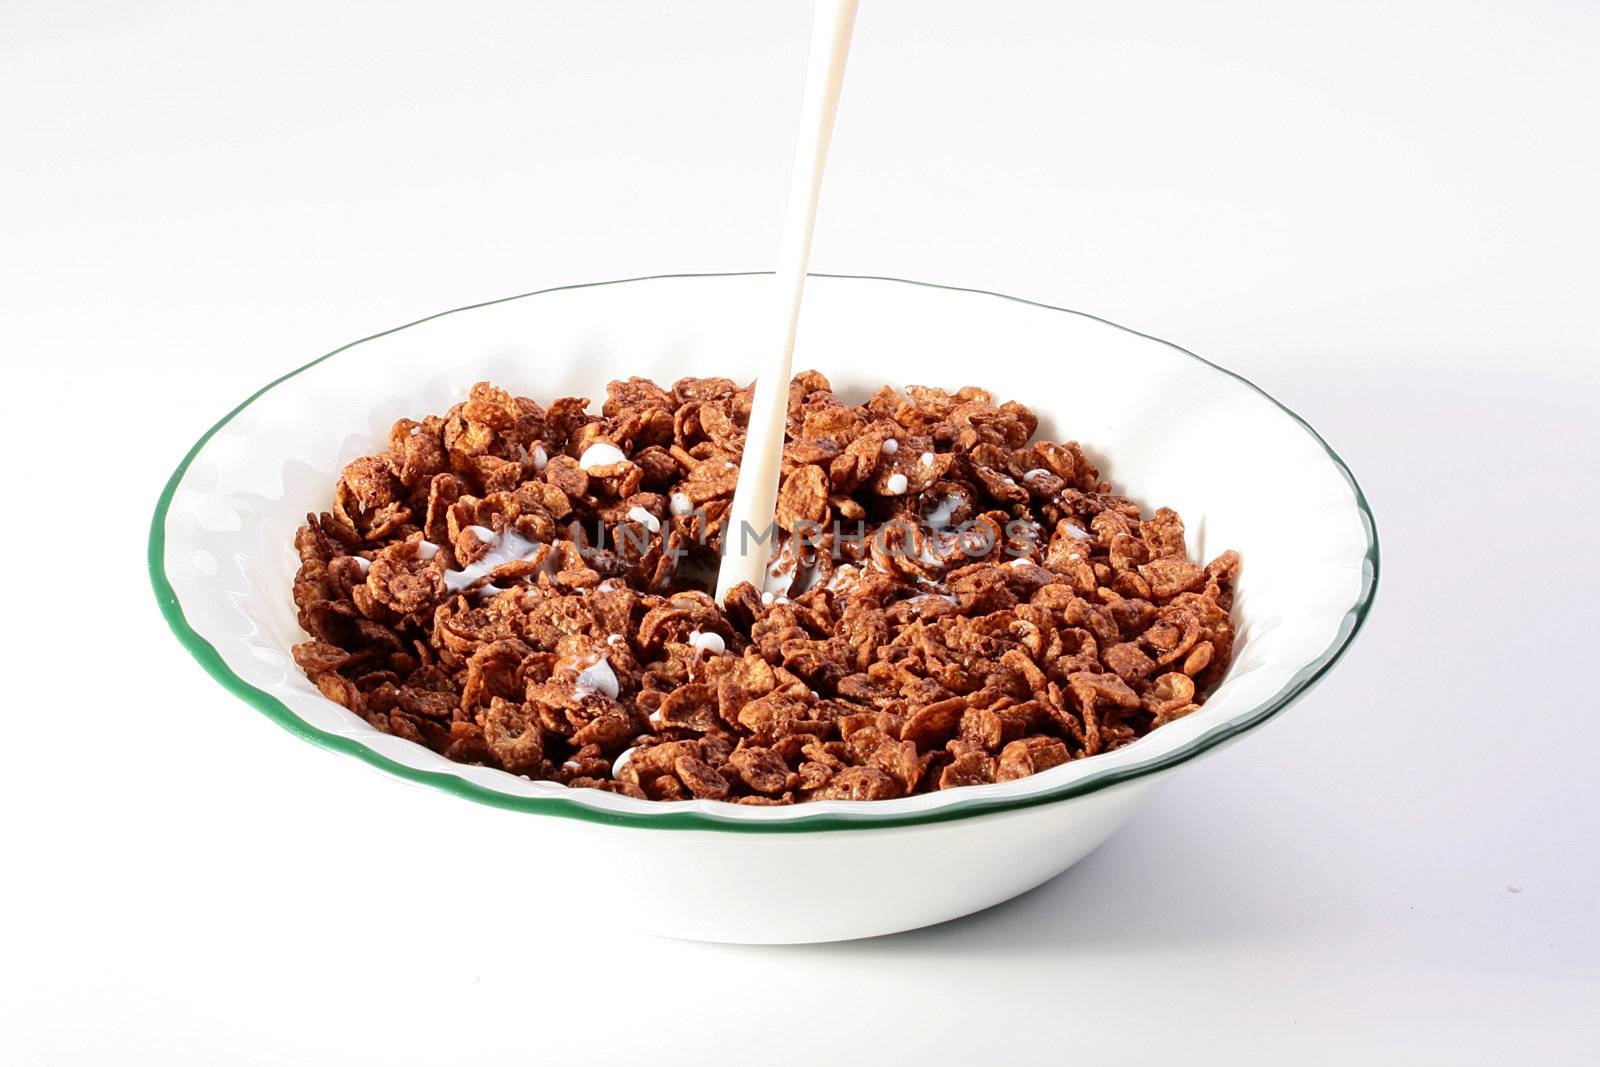 Milk pour in a deep white plate with chocolate cereals.